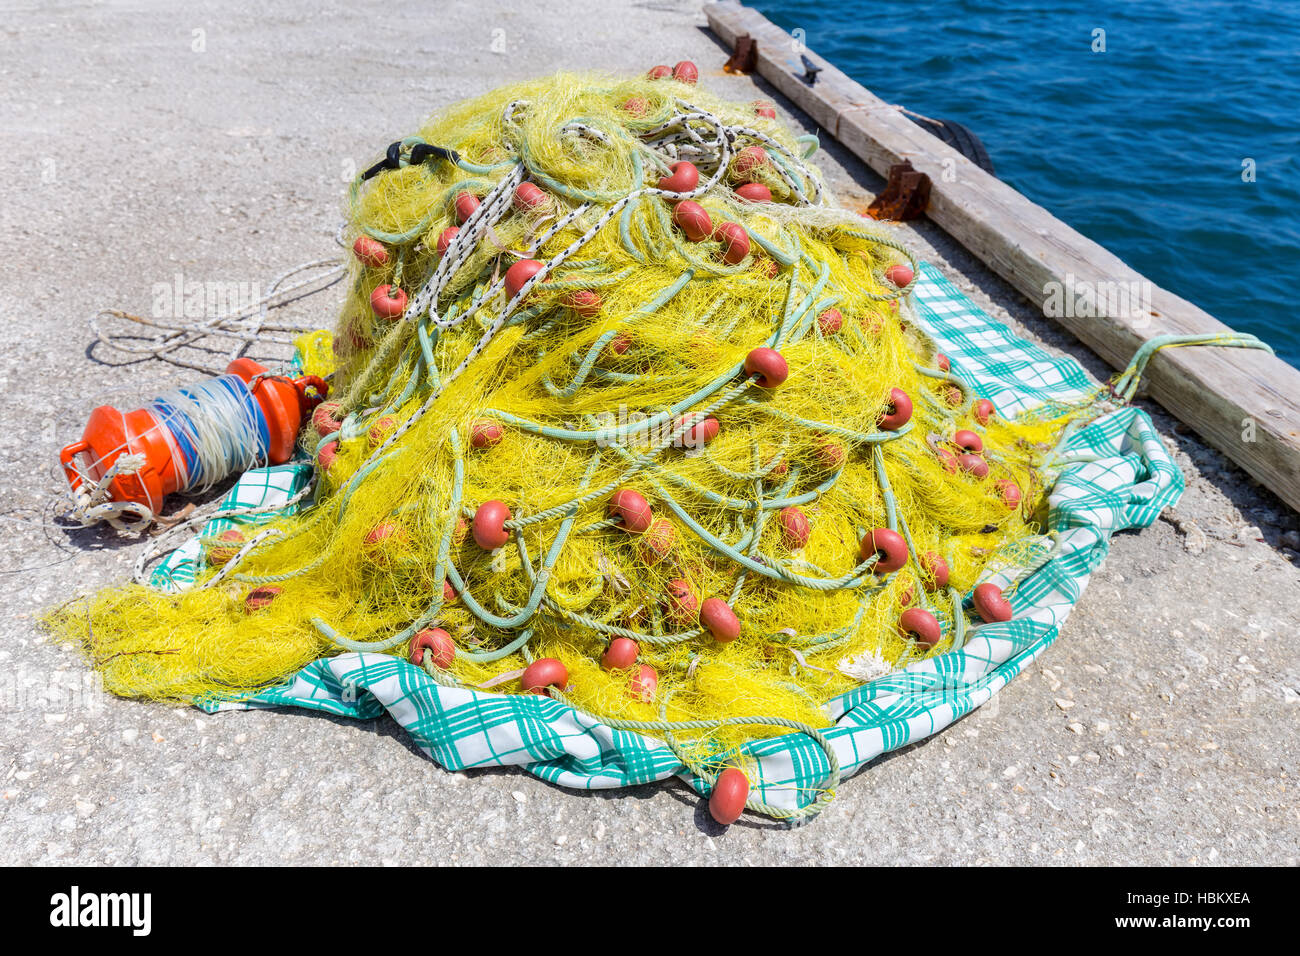 Heap of yellow fishnet on ground at sea Stock Photo